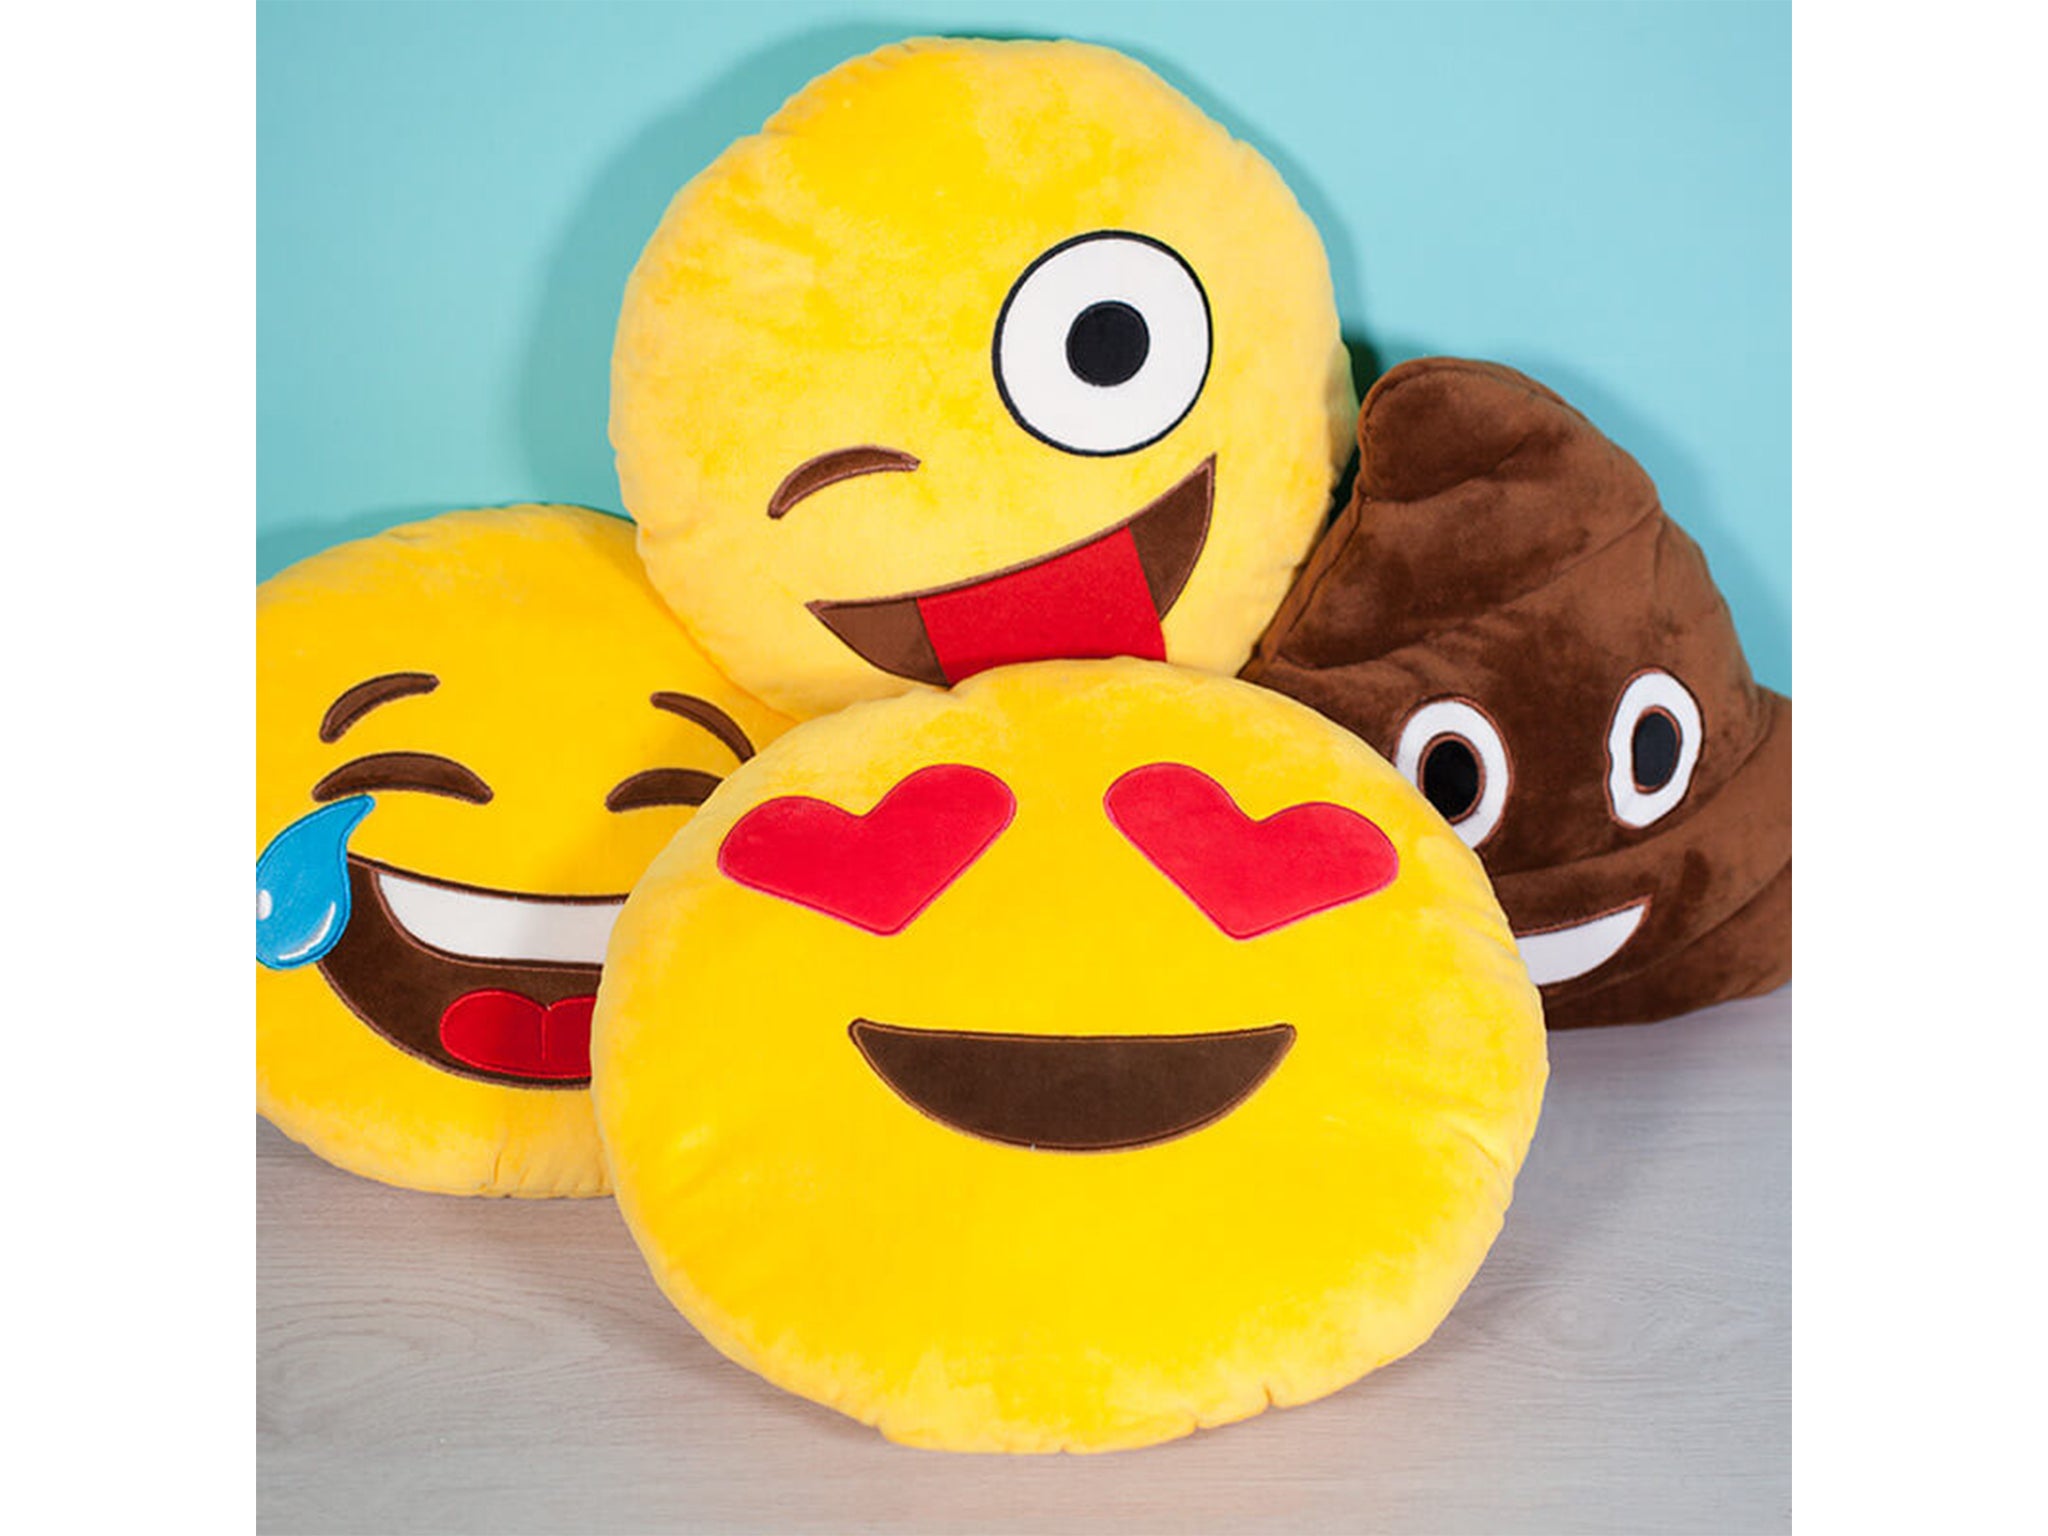 Show some love with this heart-eyed emoji cushion